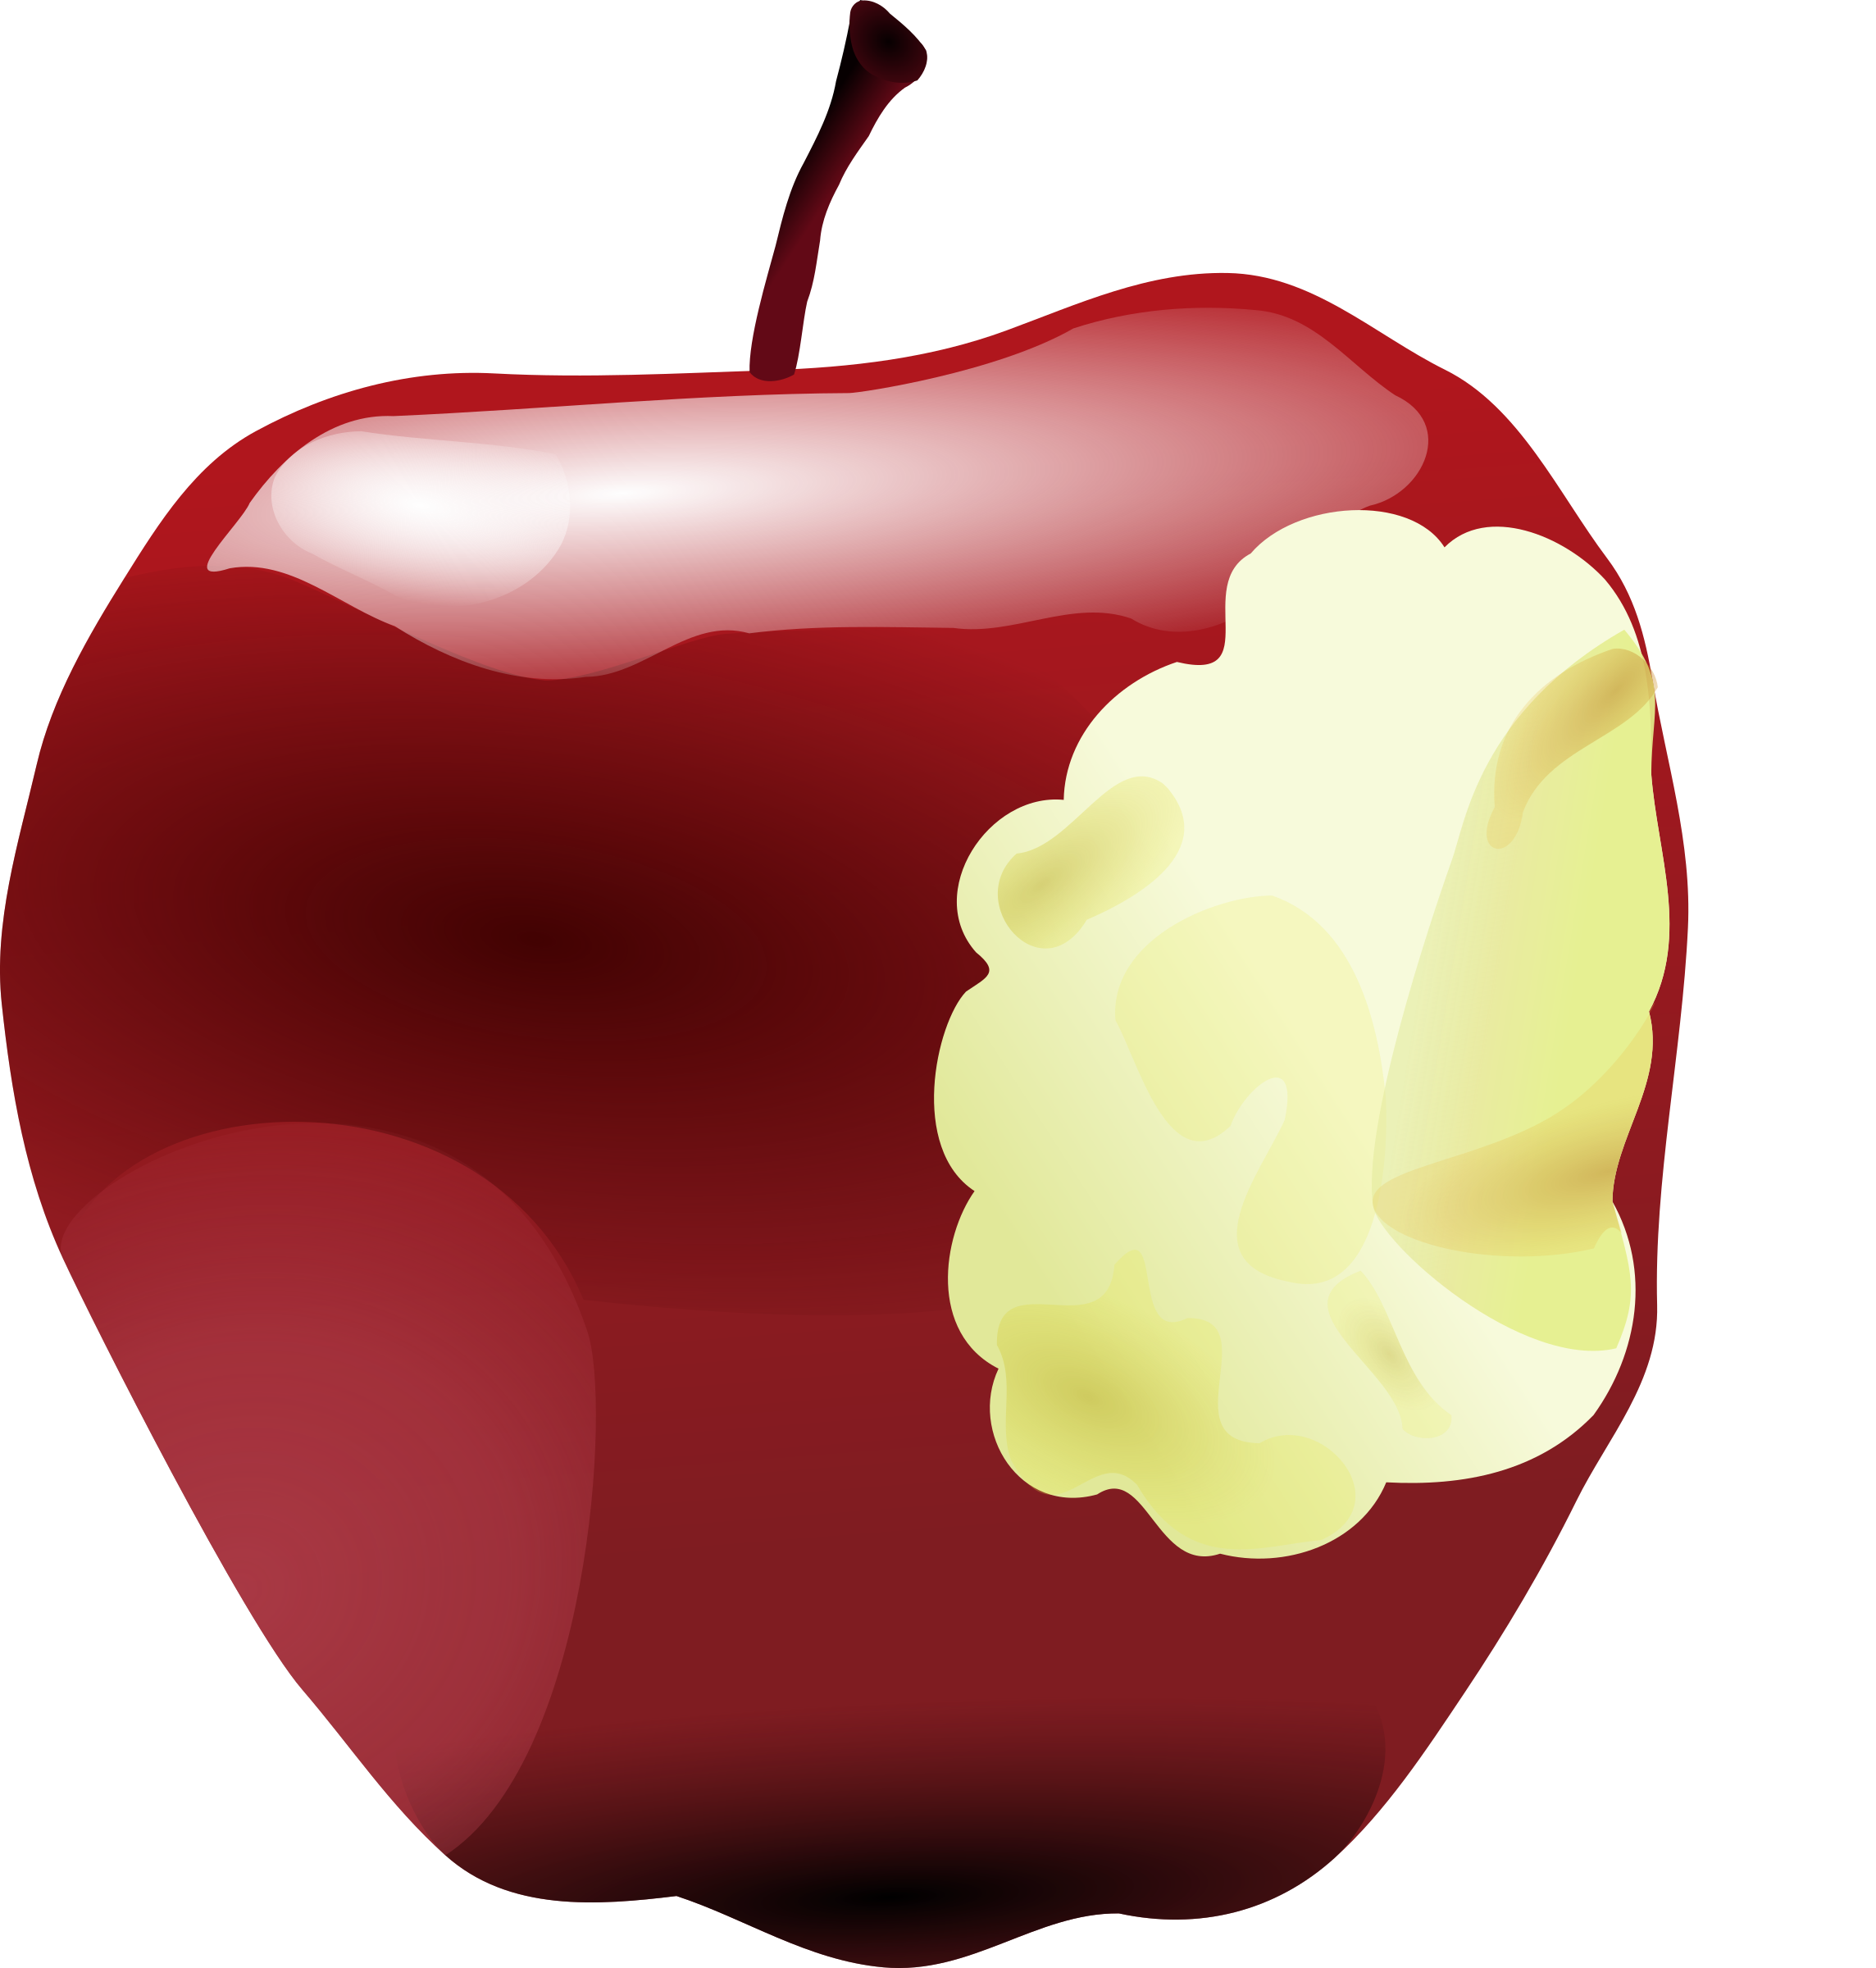 Red delicious apple clipart